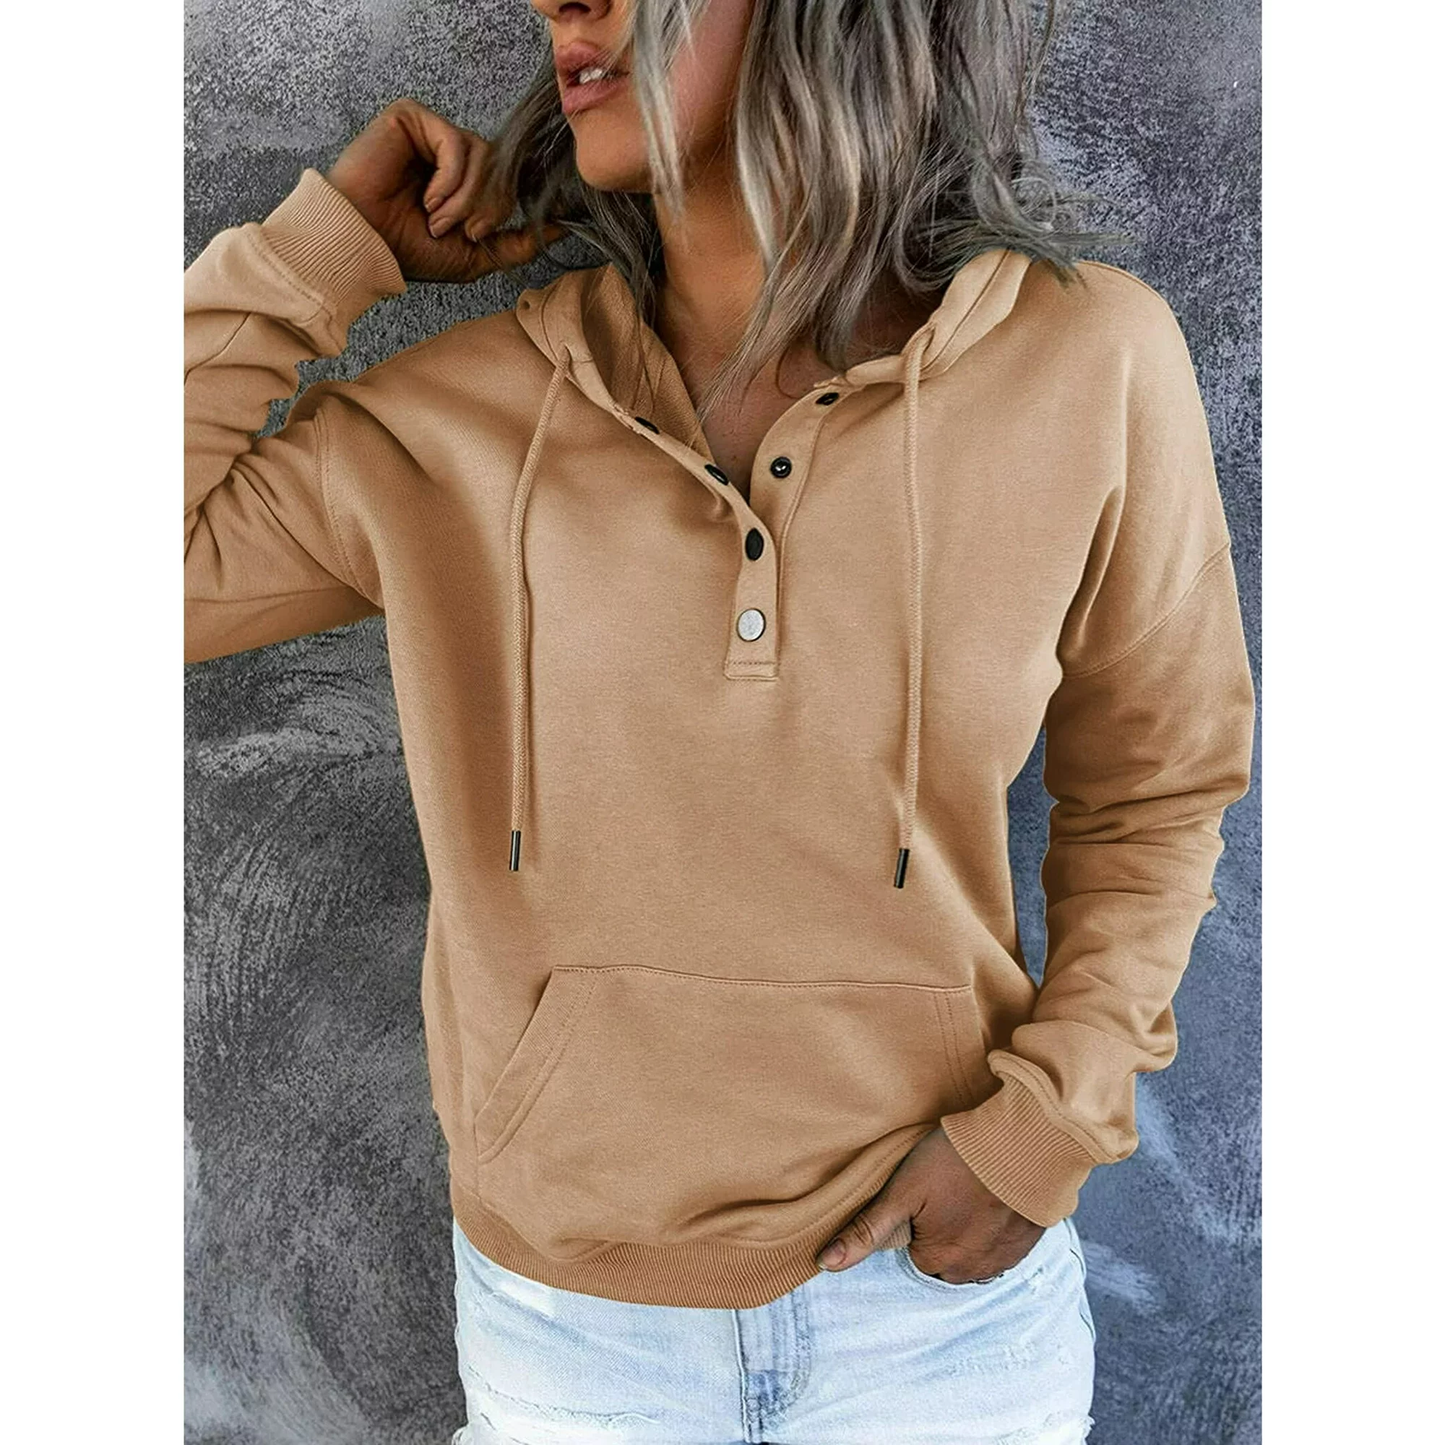 Womens Half Boutton Drawstring Sweatshirts Hooded With Pocket